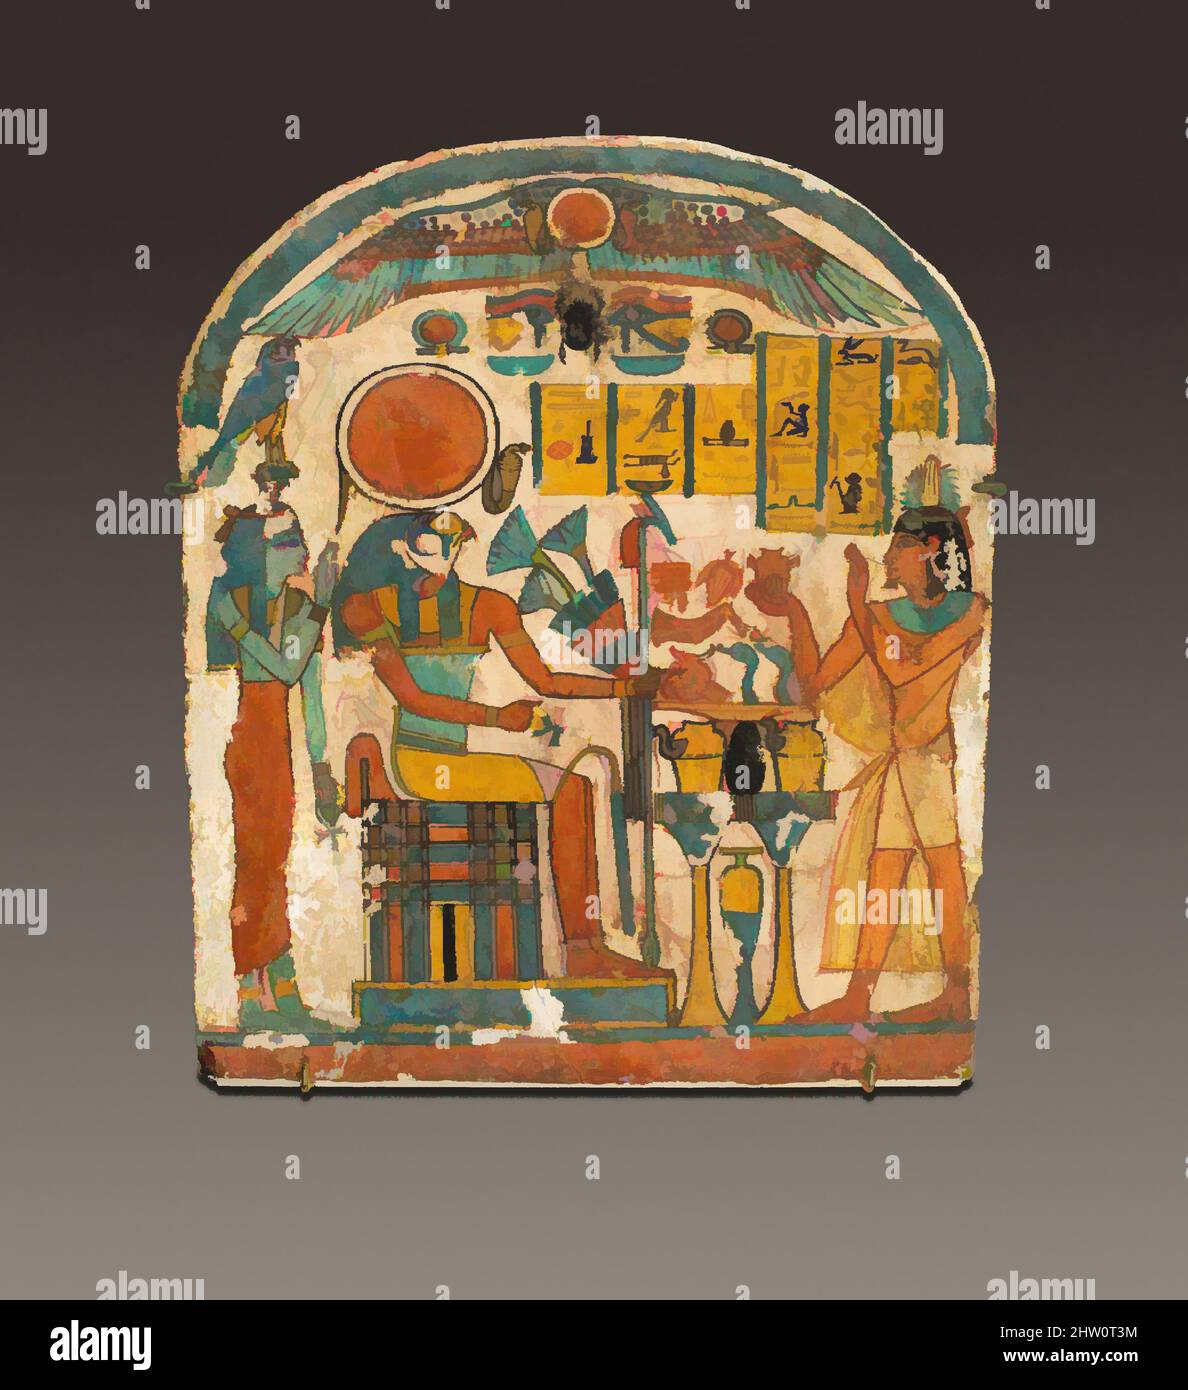 Art inspired by Stela of Saiah, Third Intermediate Period, Dynasty 22, ca. 825–712 B.C., From Egypt, Upper Egypt, Thebes, Deir el-Bahri, Tomb, 1921–22, Wood, gesso, paint, H. 23.8 cm (9 3/8 in.), This is one of four stelae found near the doorway of the brick chapel of the family of, Classic works modernized by Artotop with a splash of modernity. Shapes, color and value, eye-catching visual impact on art. Emotions through freedom of artworks in a contemporary way. A timeless message pursuing a wildly creative new direction. Artists turning to the digital medium and creating the Artotop NFT Stock Photo